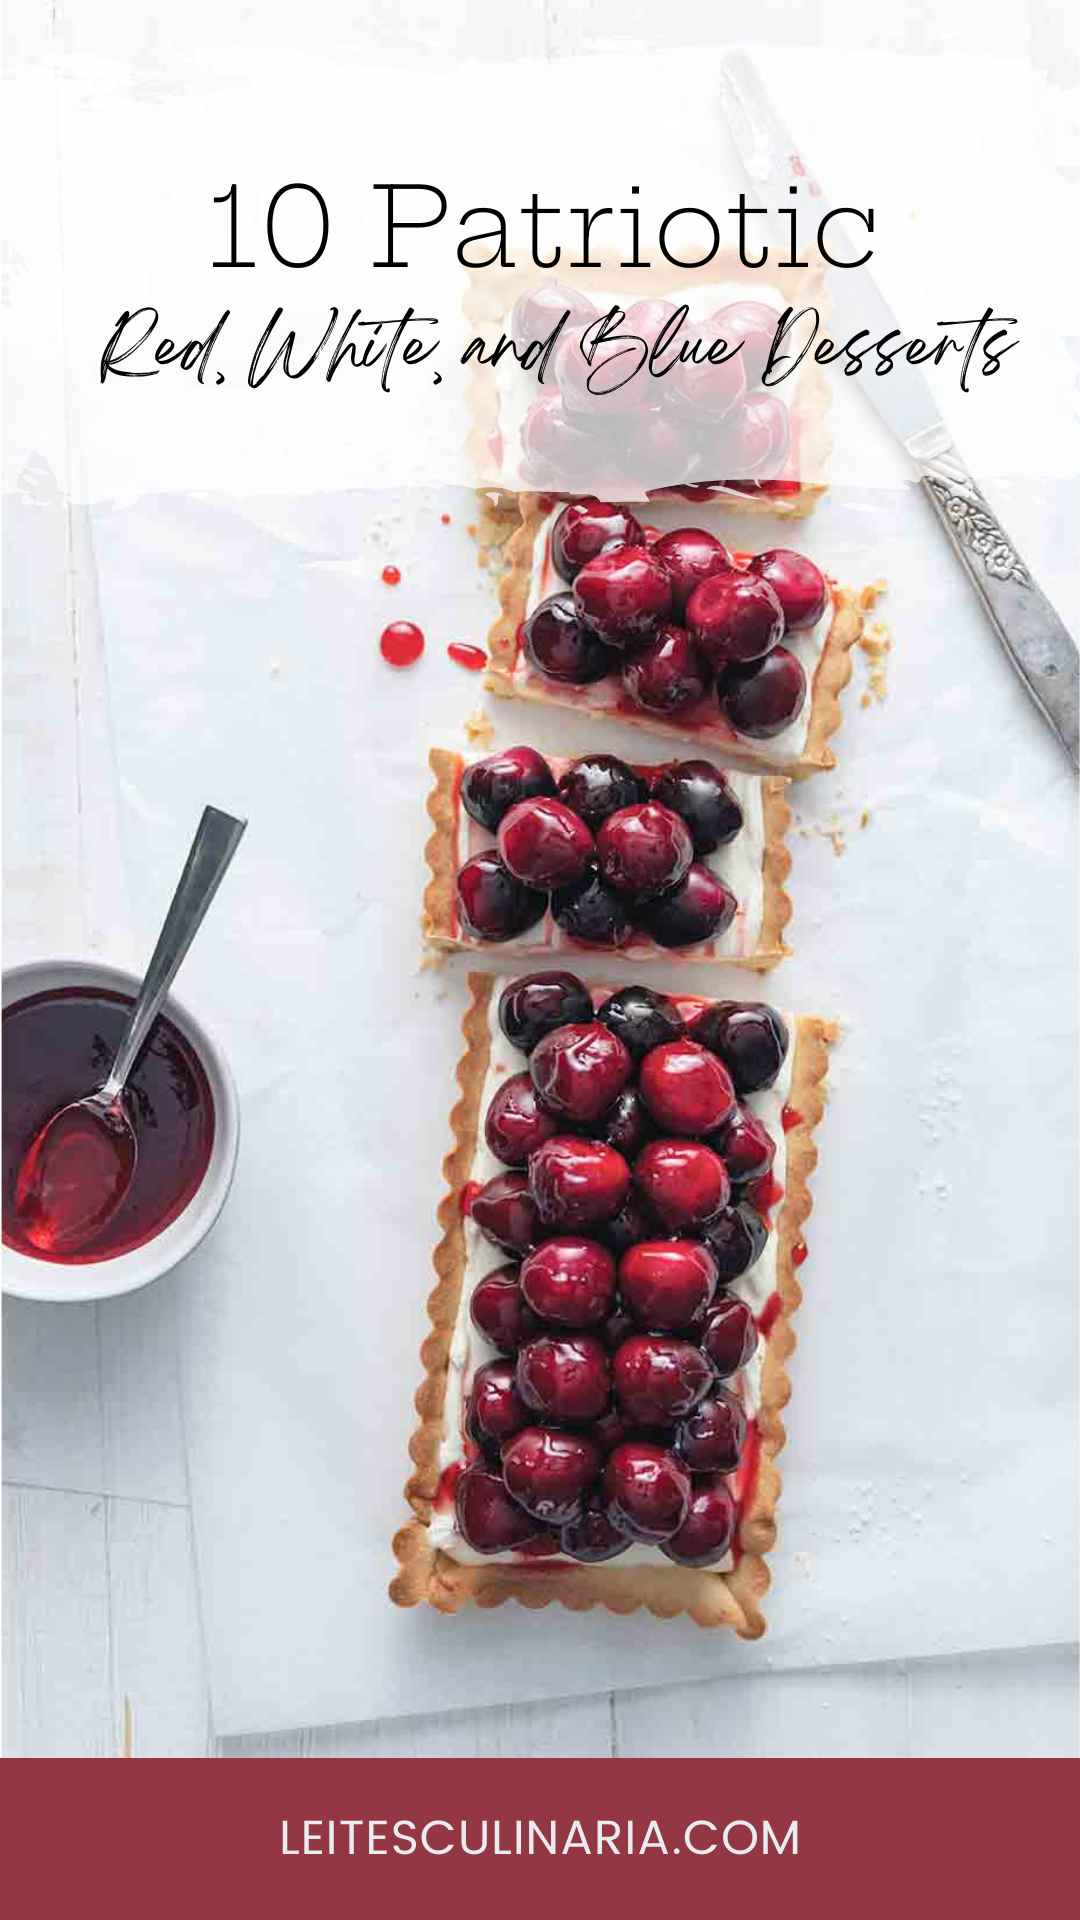 A fresh cherry tart cut into several pieces with a dish of cherry glaze on the side.